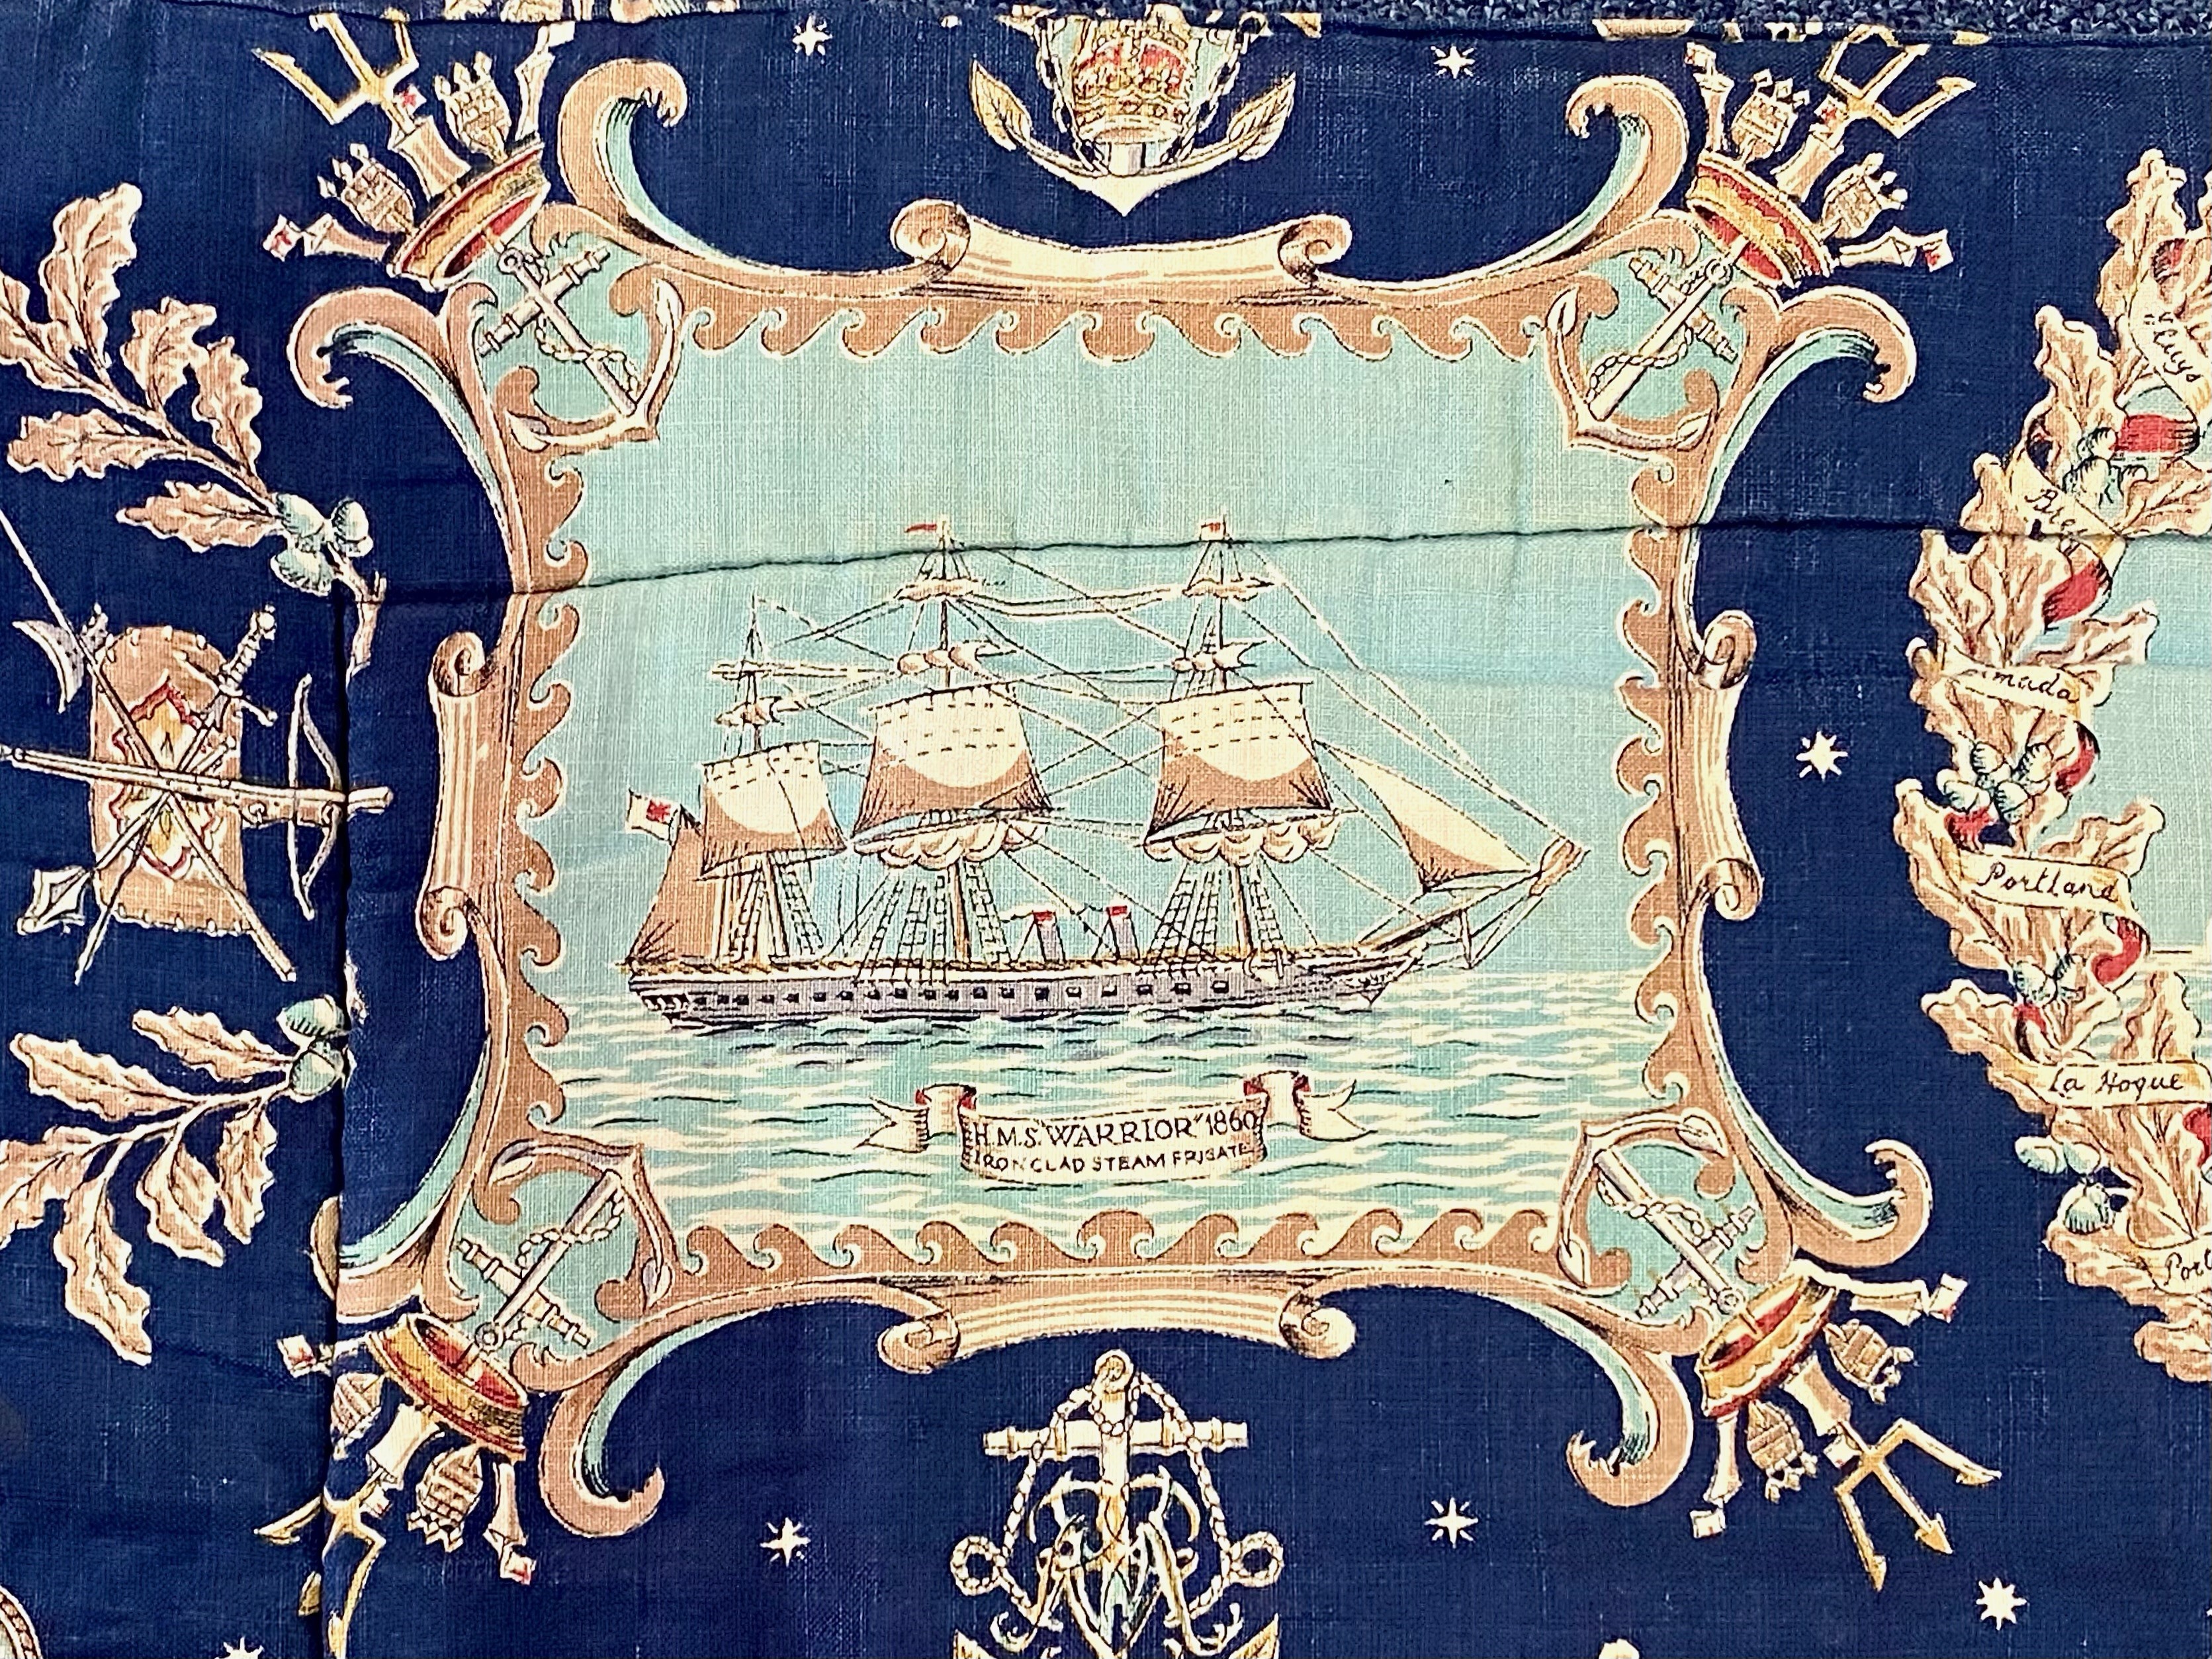 Cunard Liner Bed/Sofa Throw, blue patterned fabric representing British Naval History from 1515. - Image 2 of 3